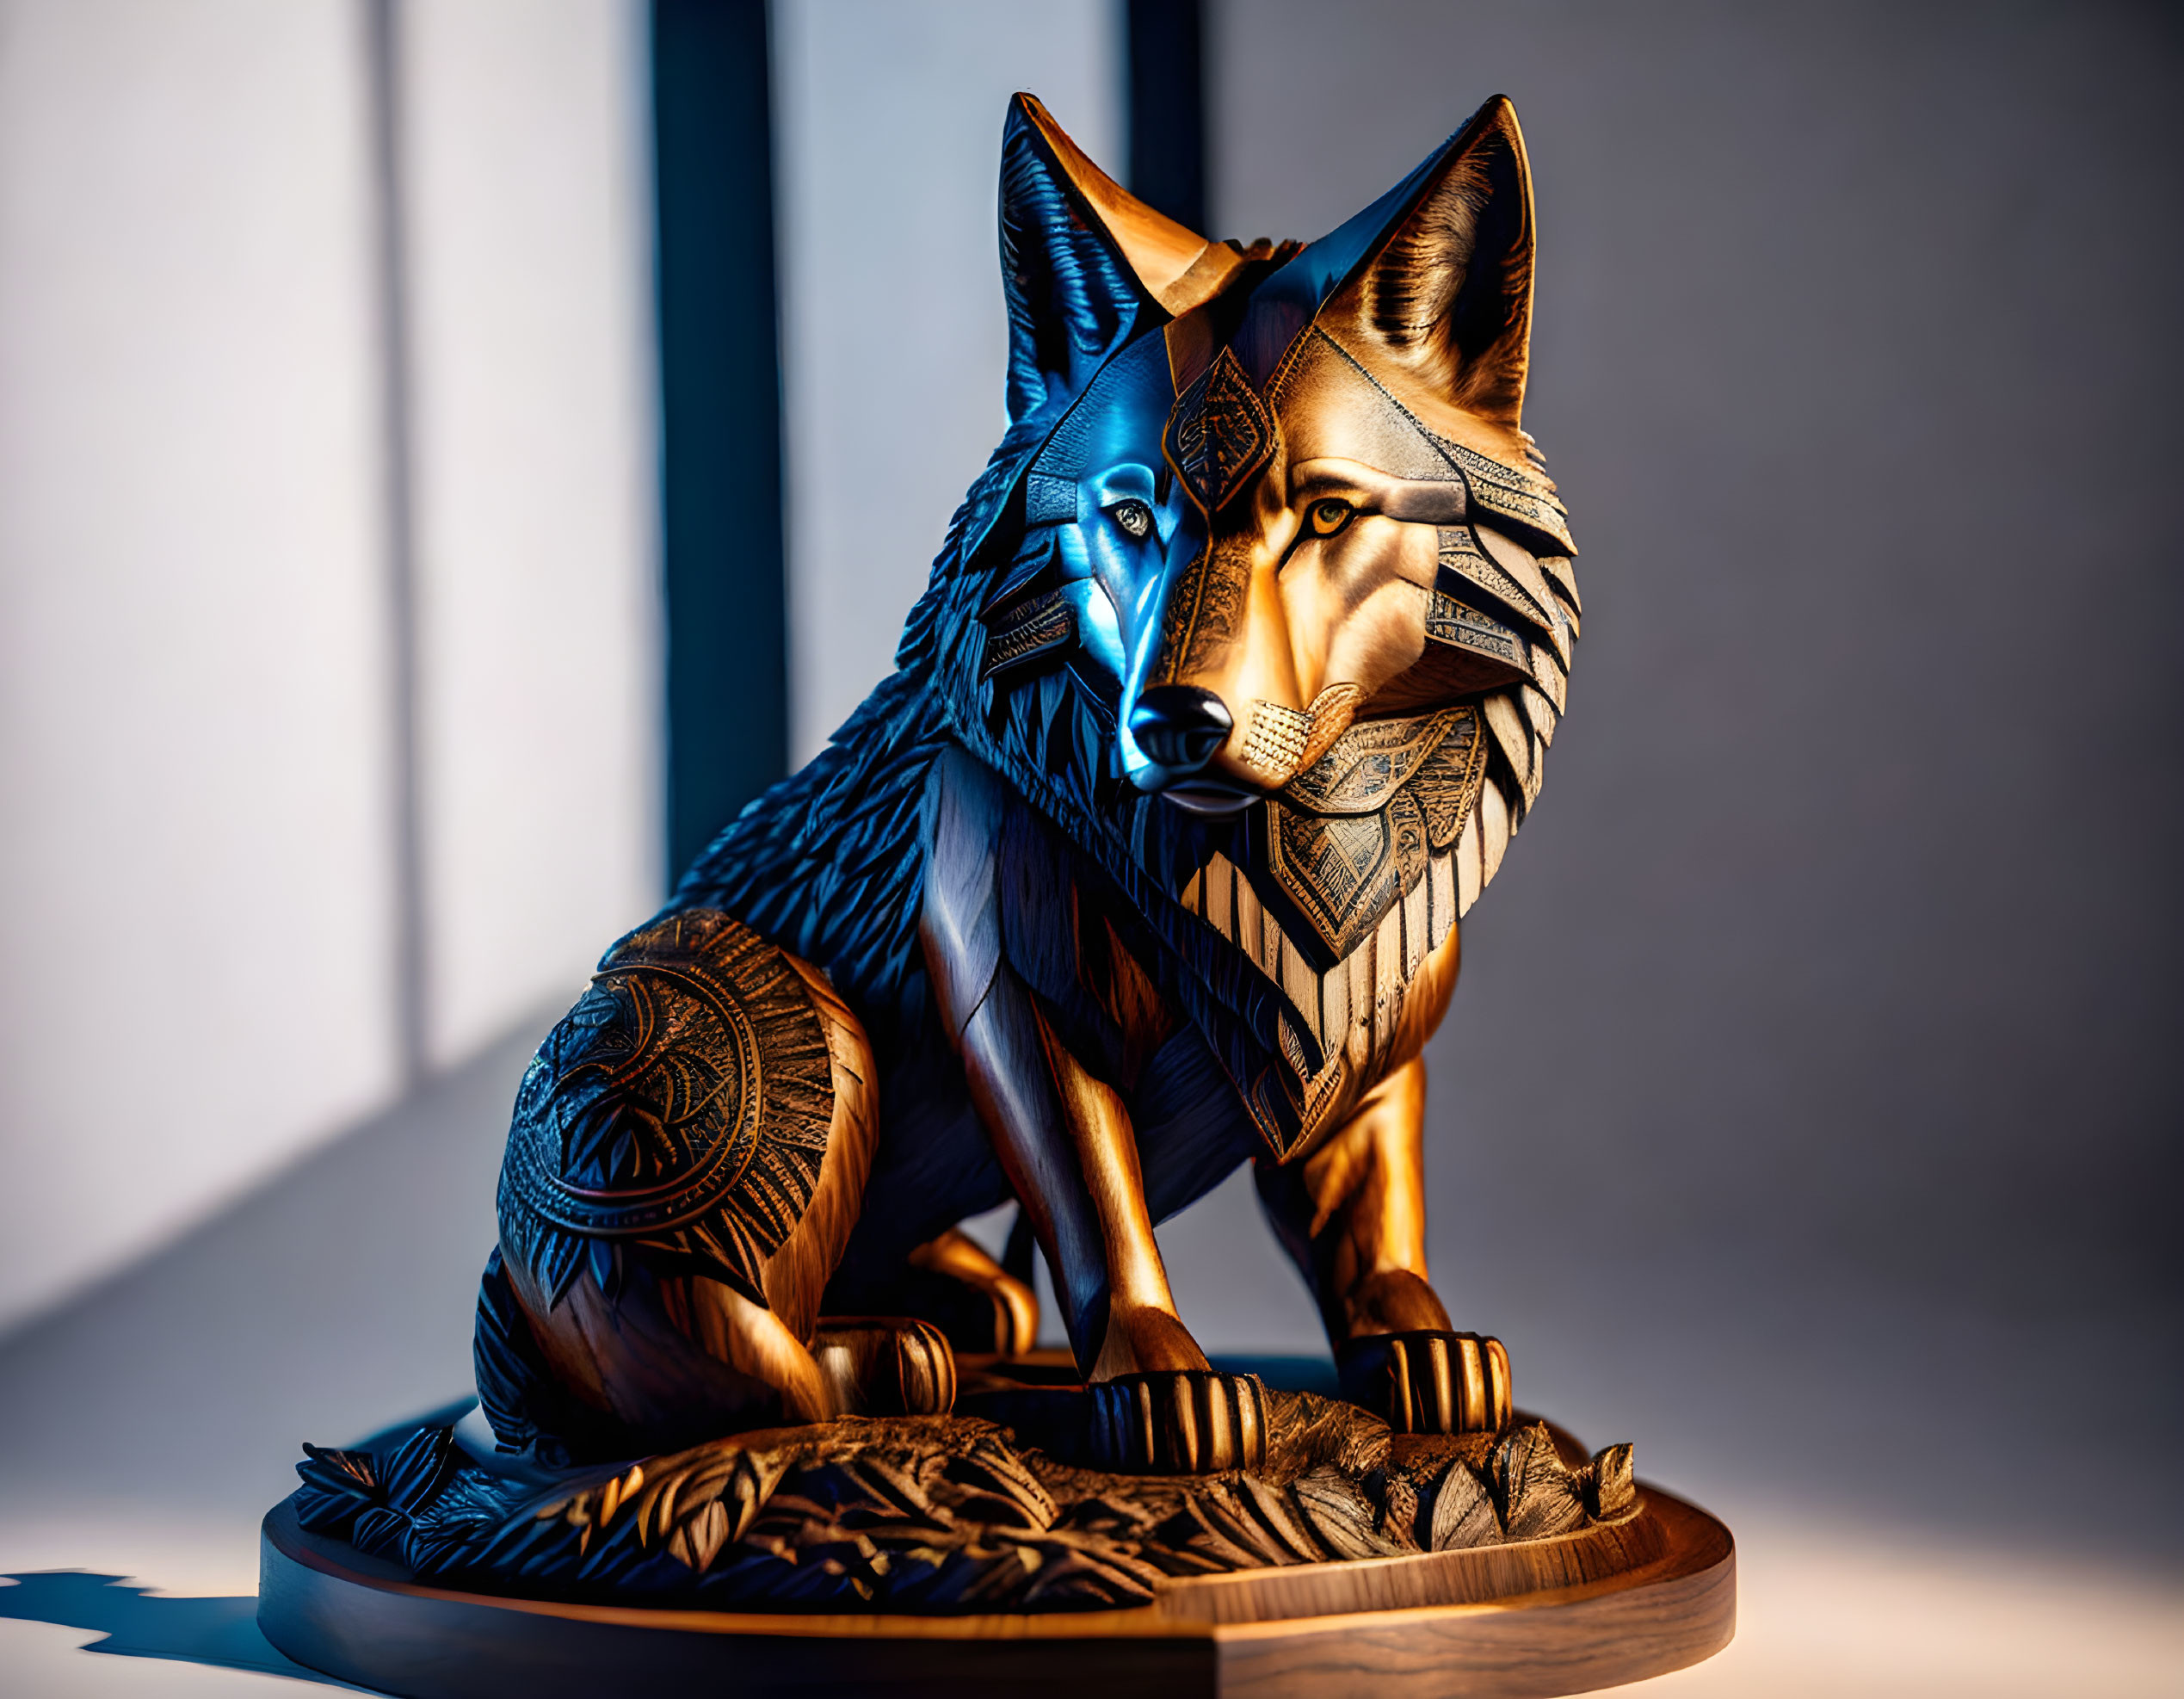 Detailed Carved Wooden Wolf Statue with Dramatic Lighting on High-Contrast Background